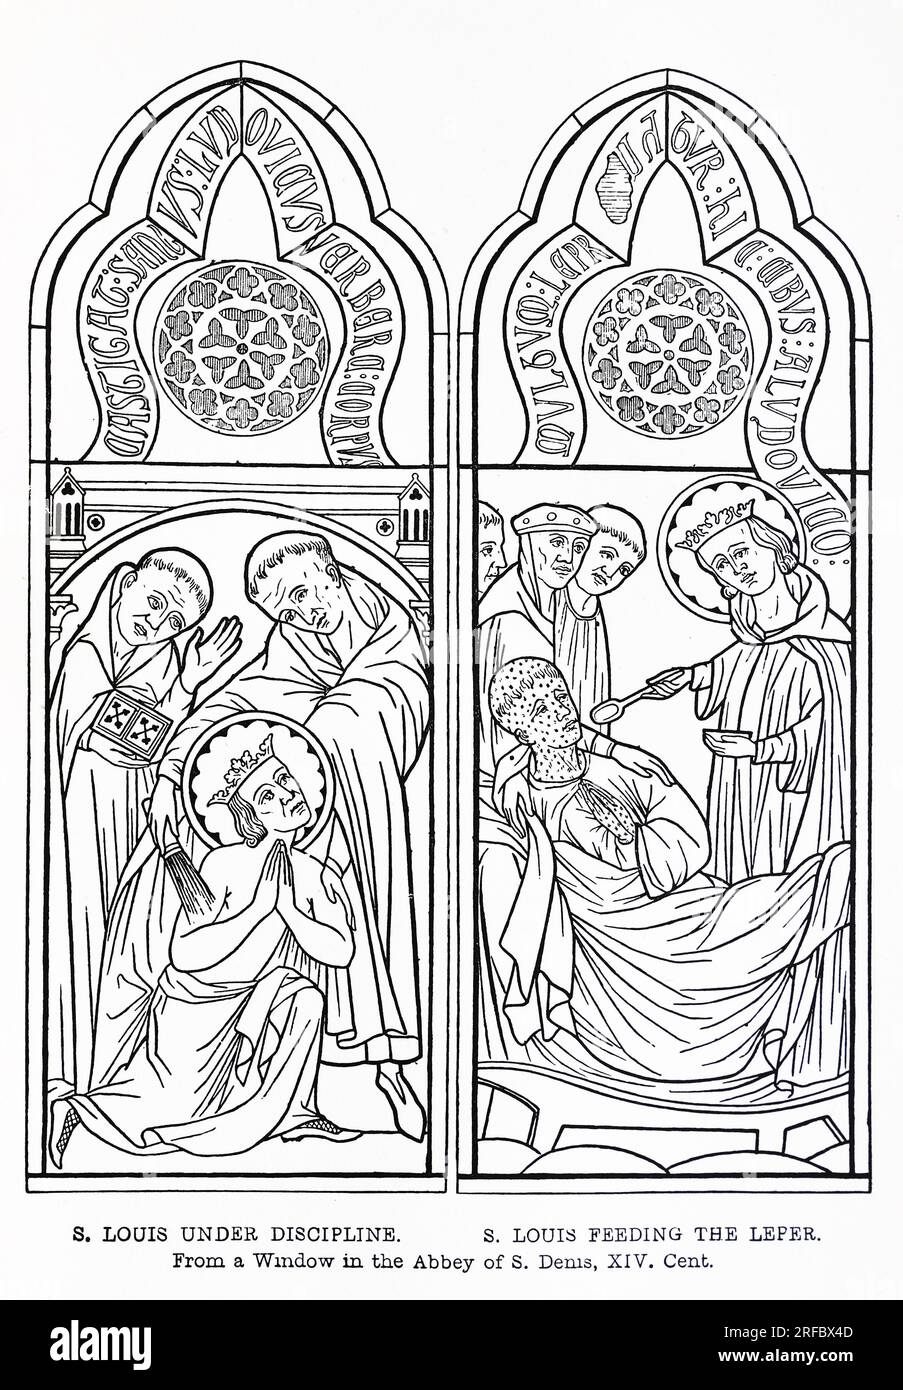 King Louis IX of France (Saint Louis) under discipline and feeding the leper, from a 14th century stained glass window in the Abbey of St Denis. Engraving from Lives of the Saints by Sabin Baring-Gould. Stock Photo